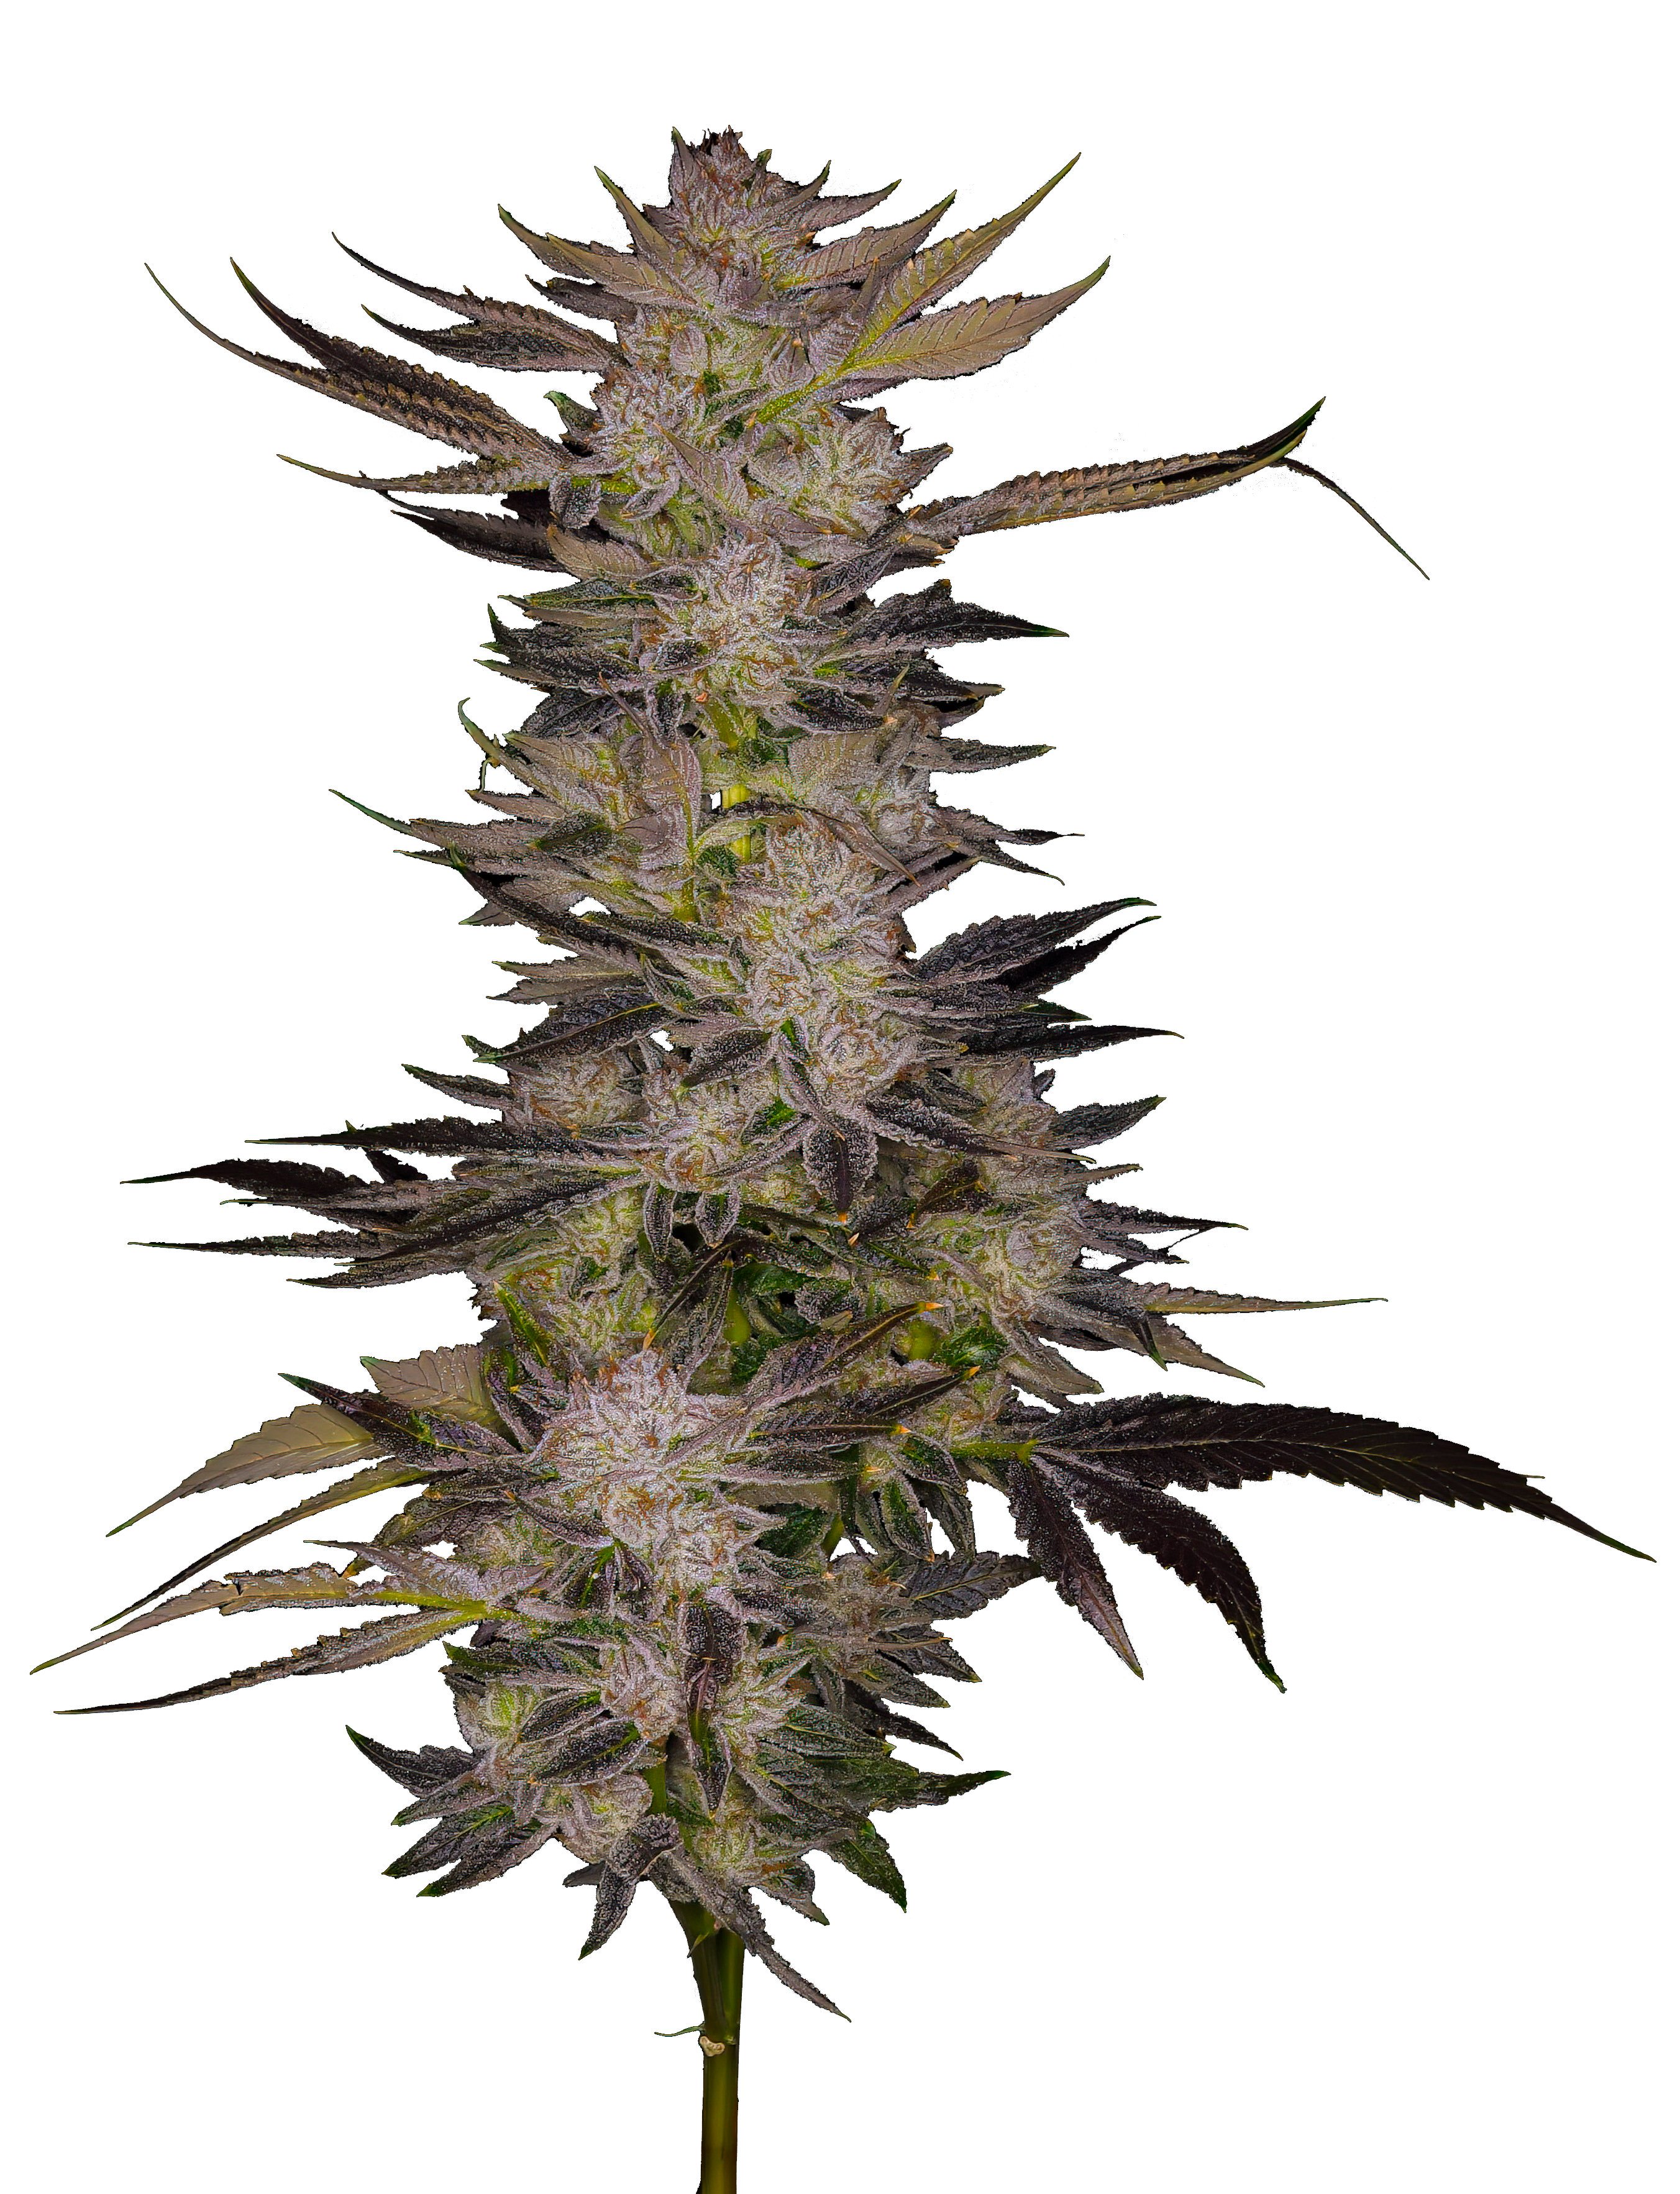 Cola shot of the Sour Kush cultivar from GraniteLeaf Cannabis.